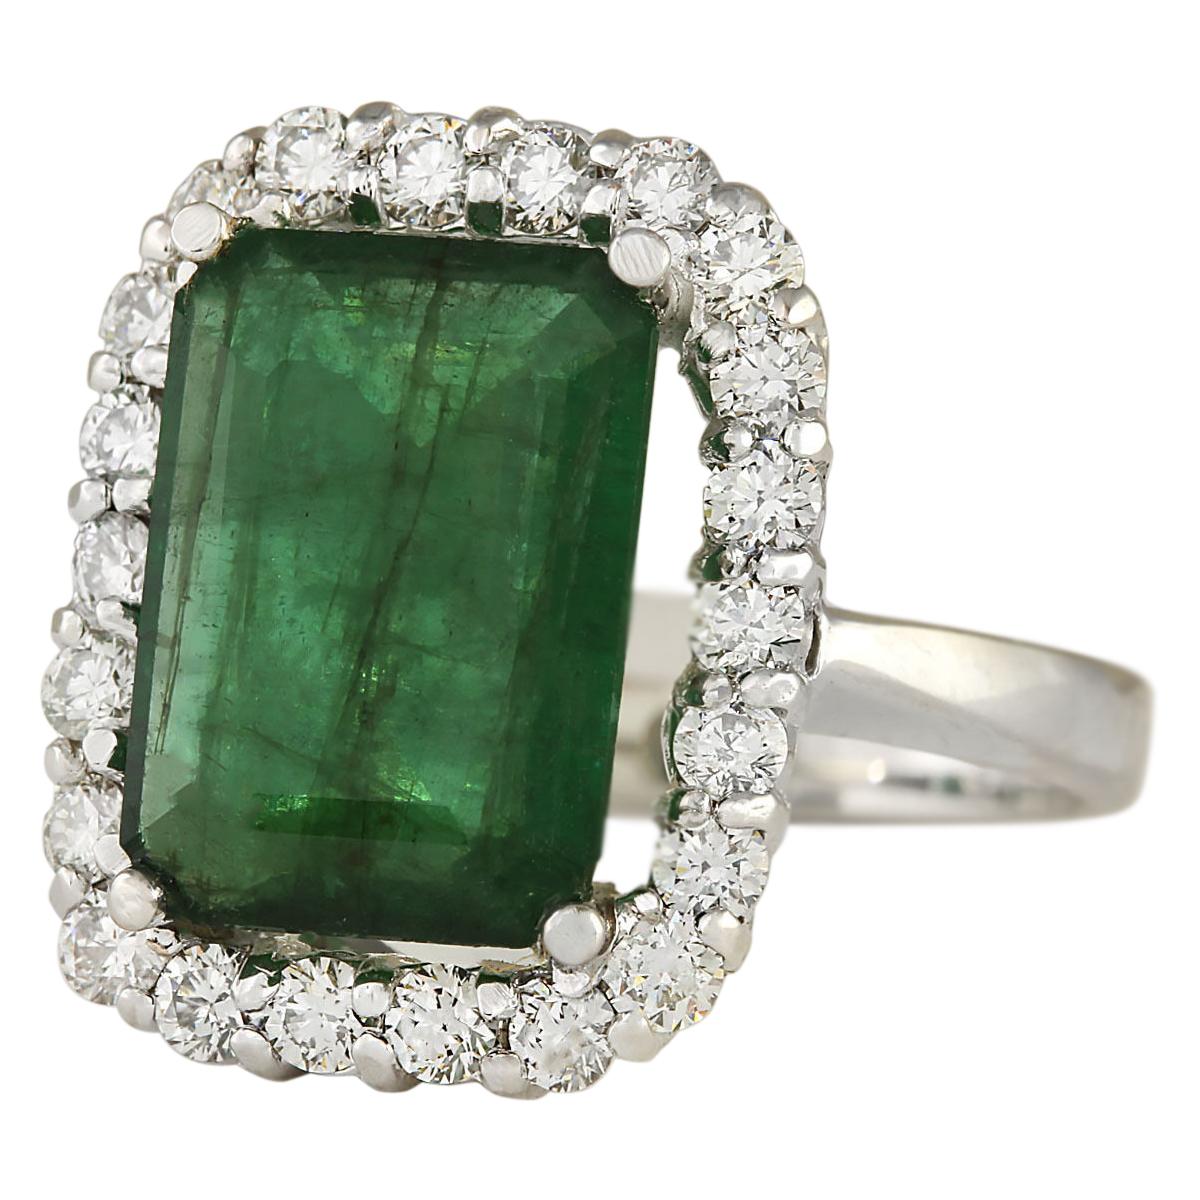 5.95 Carat Emerald 14 Karat White Gold Diamond Ring
Stamped: 14K White Gold
Total Ring Weight: 8.4 Grams
Total  Emerald Weight is 4.80 Carat (Measures: 14.00x10.00 mm)
Color: Green
Total  Diamond Weight is 1.15 Carat
Color: F-G, Clarity: